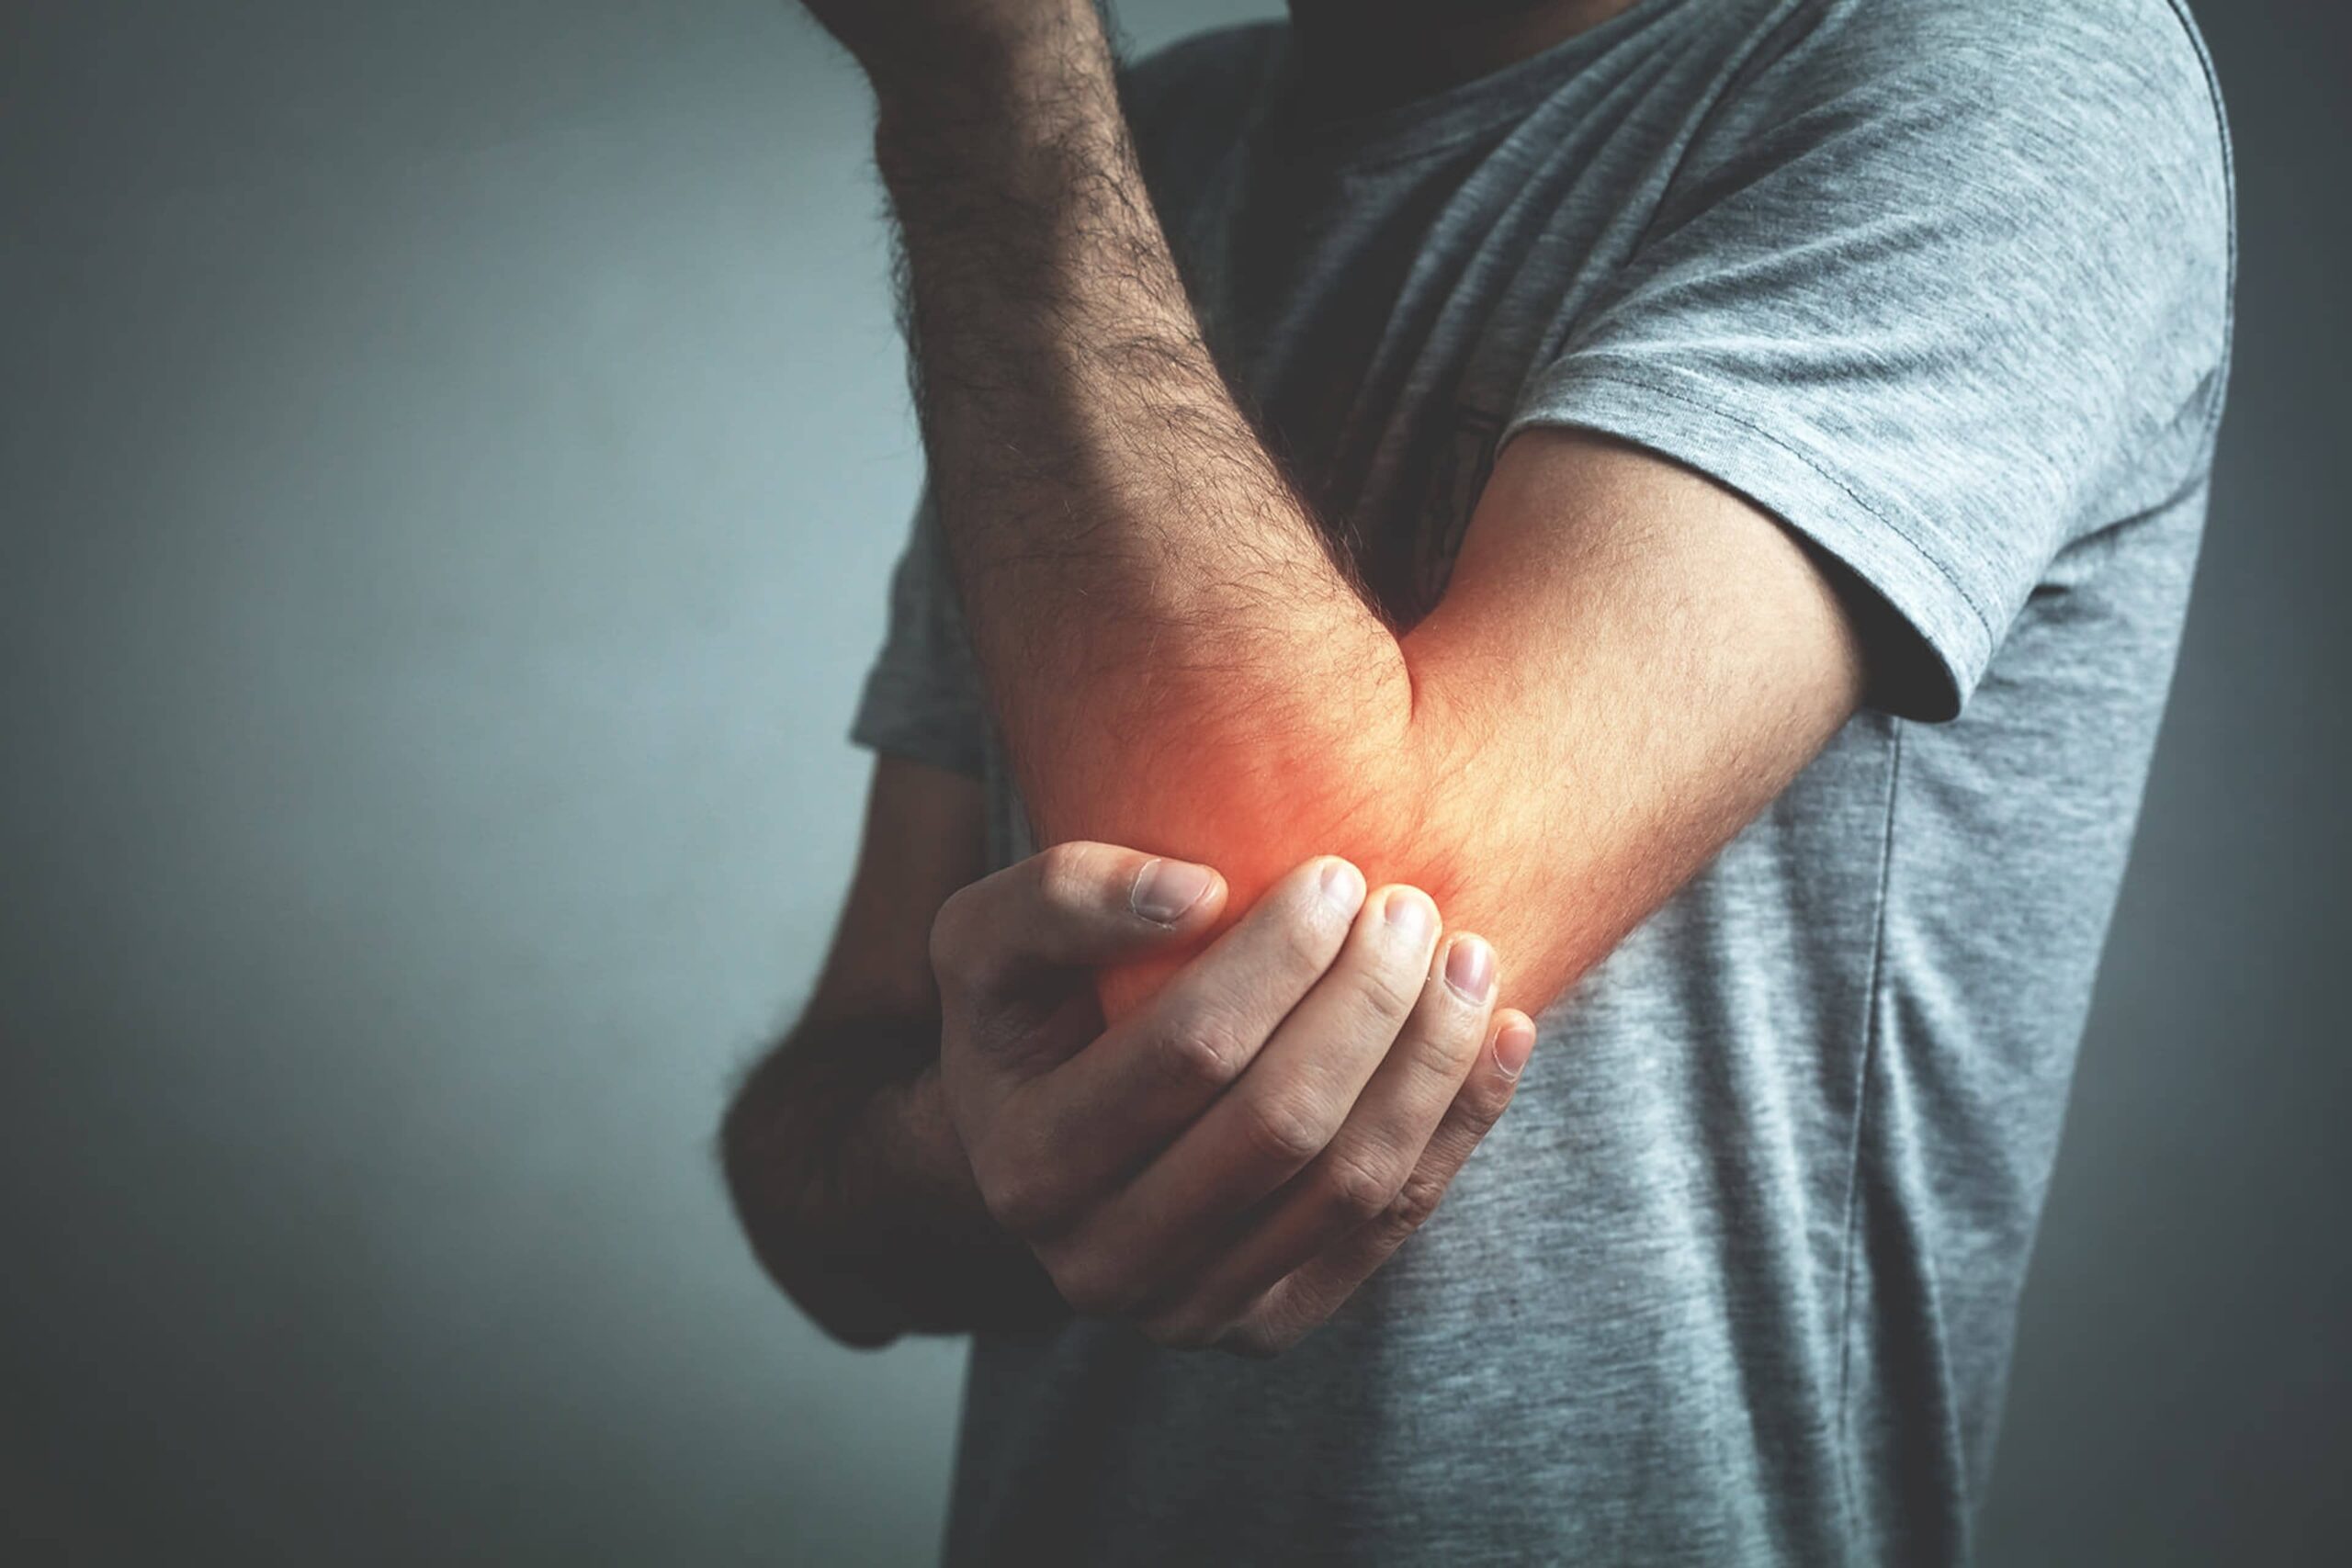 From a bicep or tricep tendon tear to golfer's or tennis elbow, pain in your elbow can keep you from doing the activities you love. Visit G2 Orthopedics and Sports Medicine to find the elbow pain relief you've been missing.